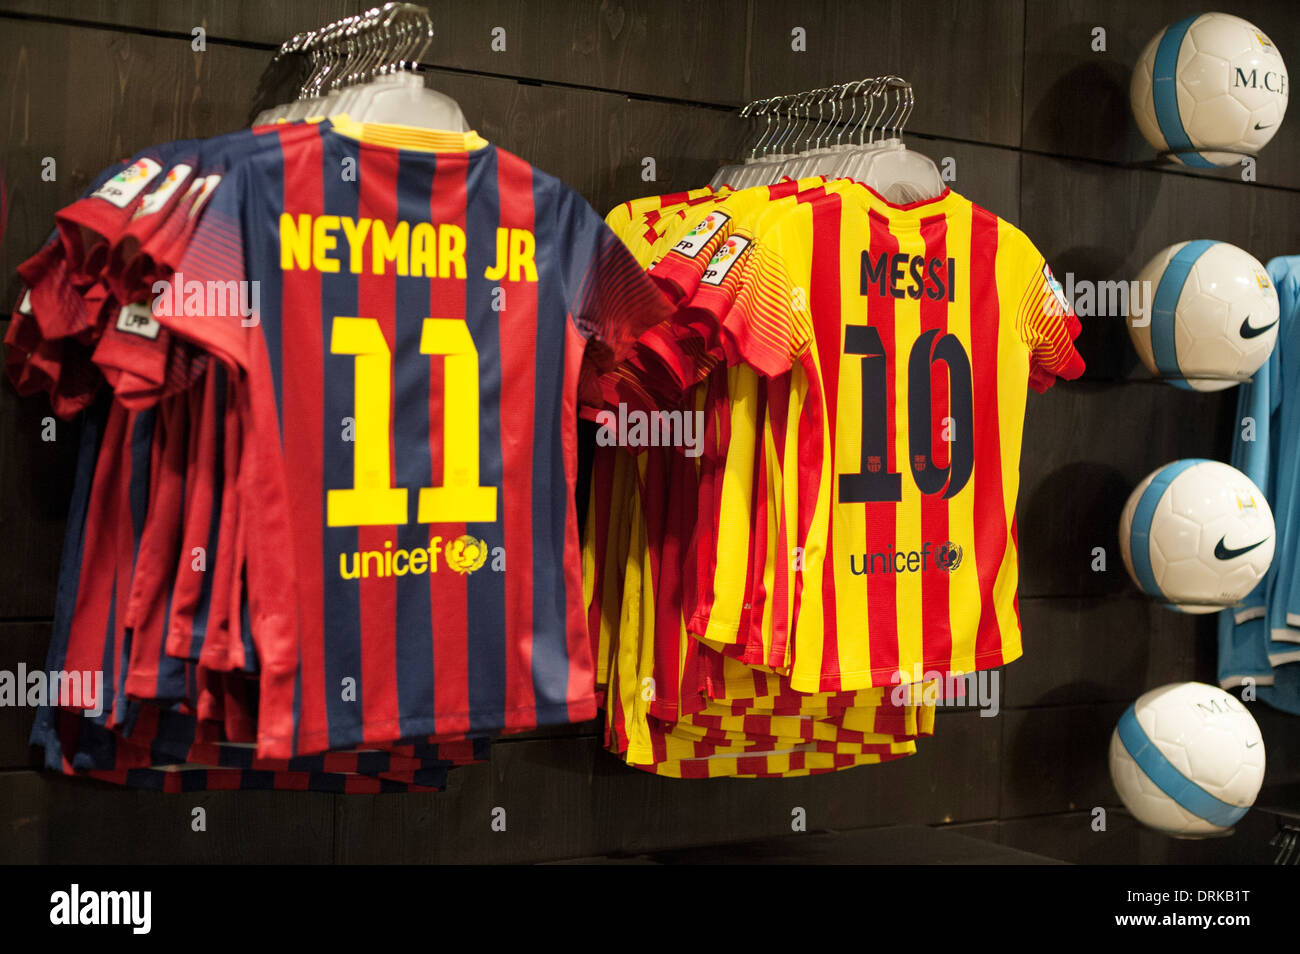 Neymar Barcelona High Resolution Stock Photography and Images - Alamy